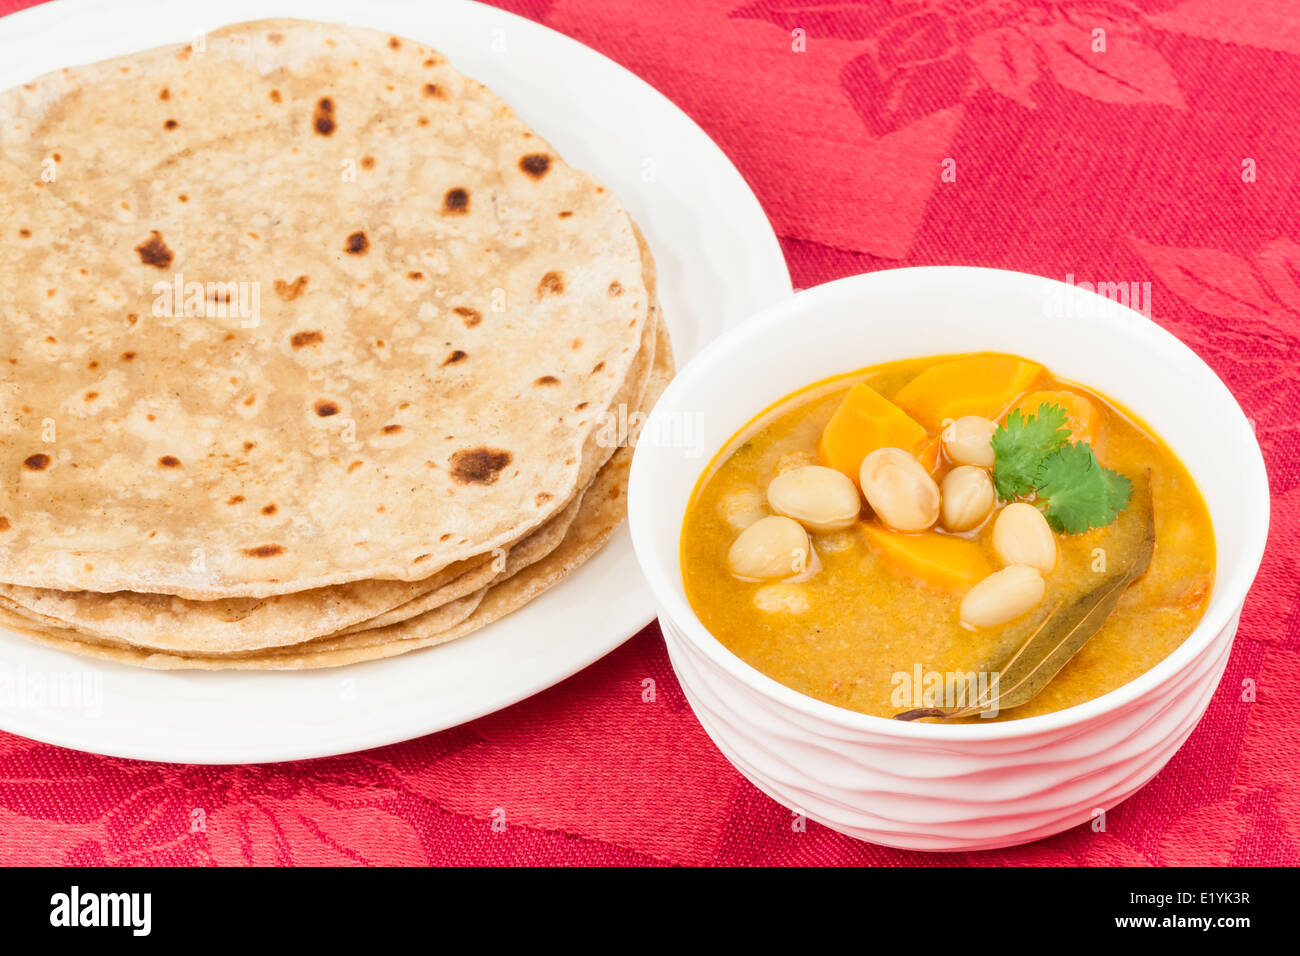 Homemade chapati (Indian bread) served with delicious Indian vegetable curry. It is prepared using carrots, beans and spices. Stock Photo